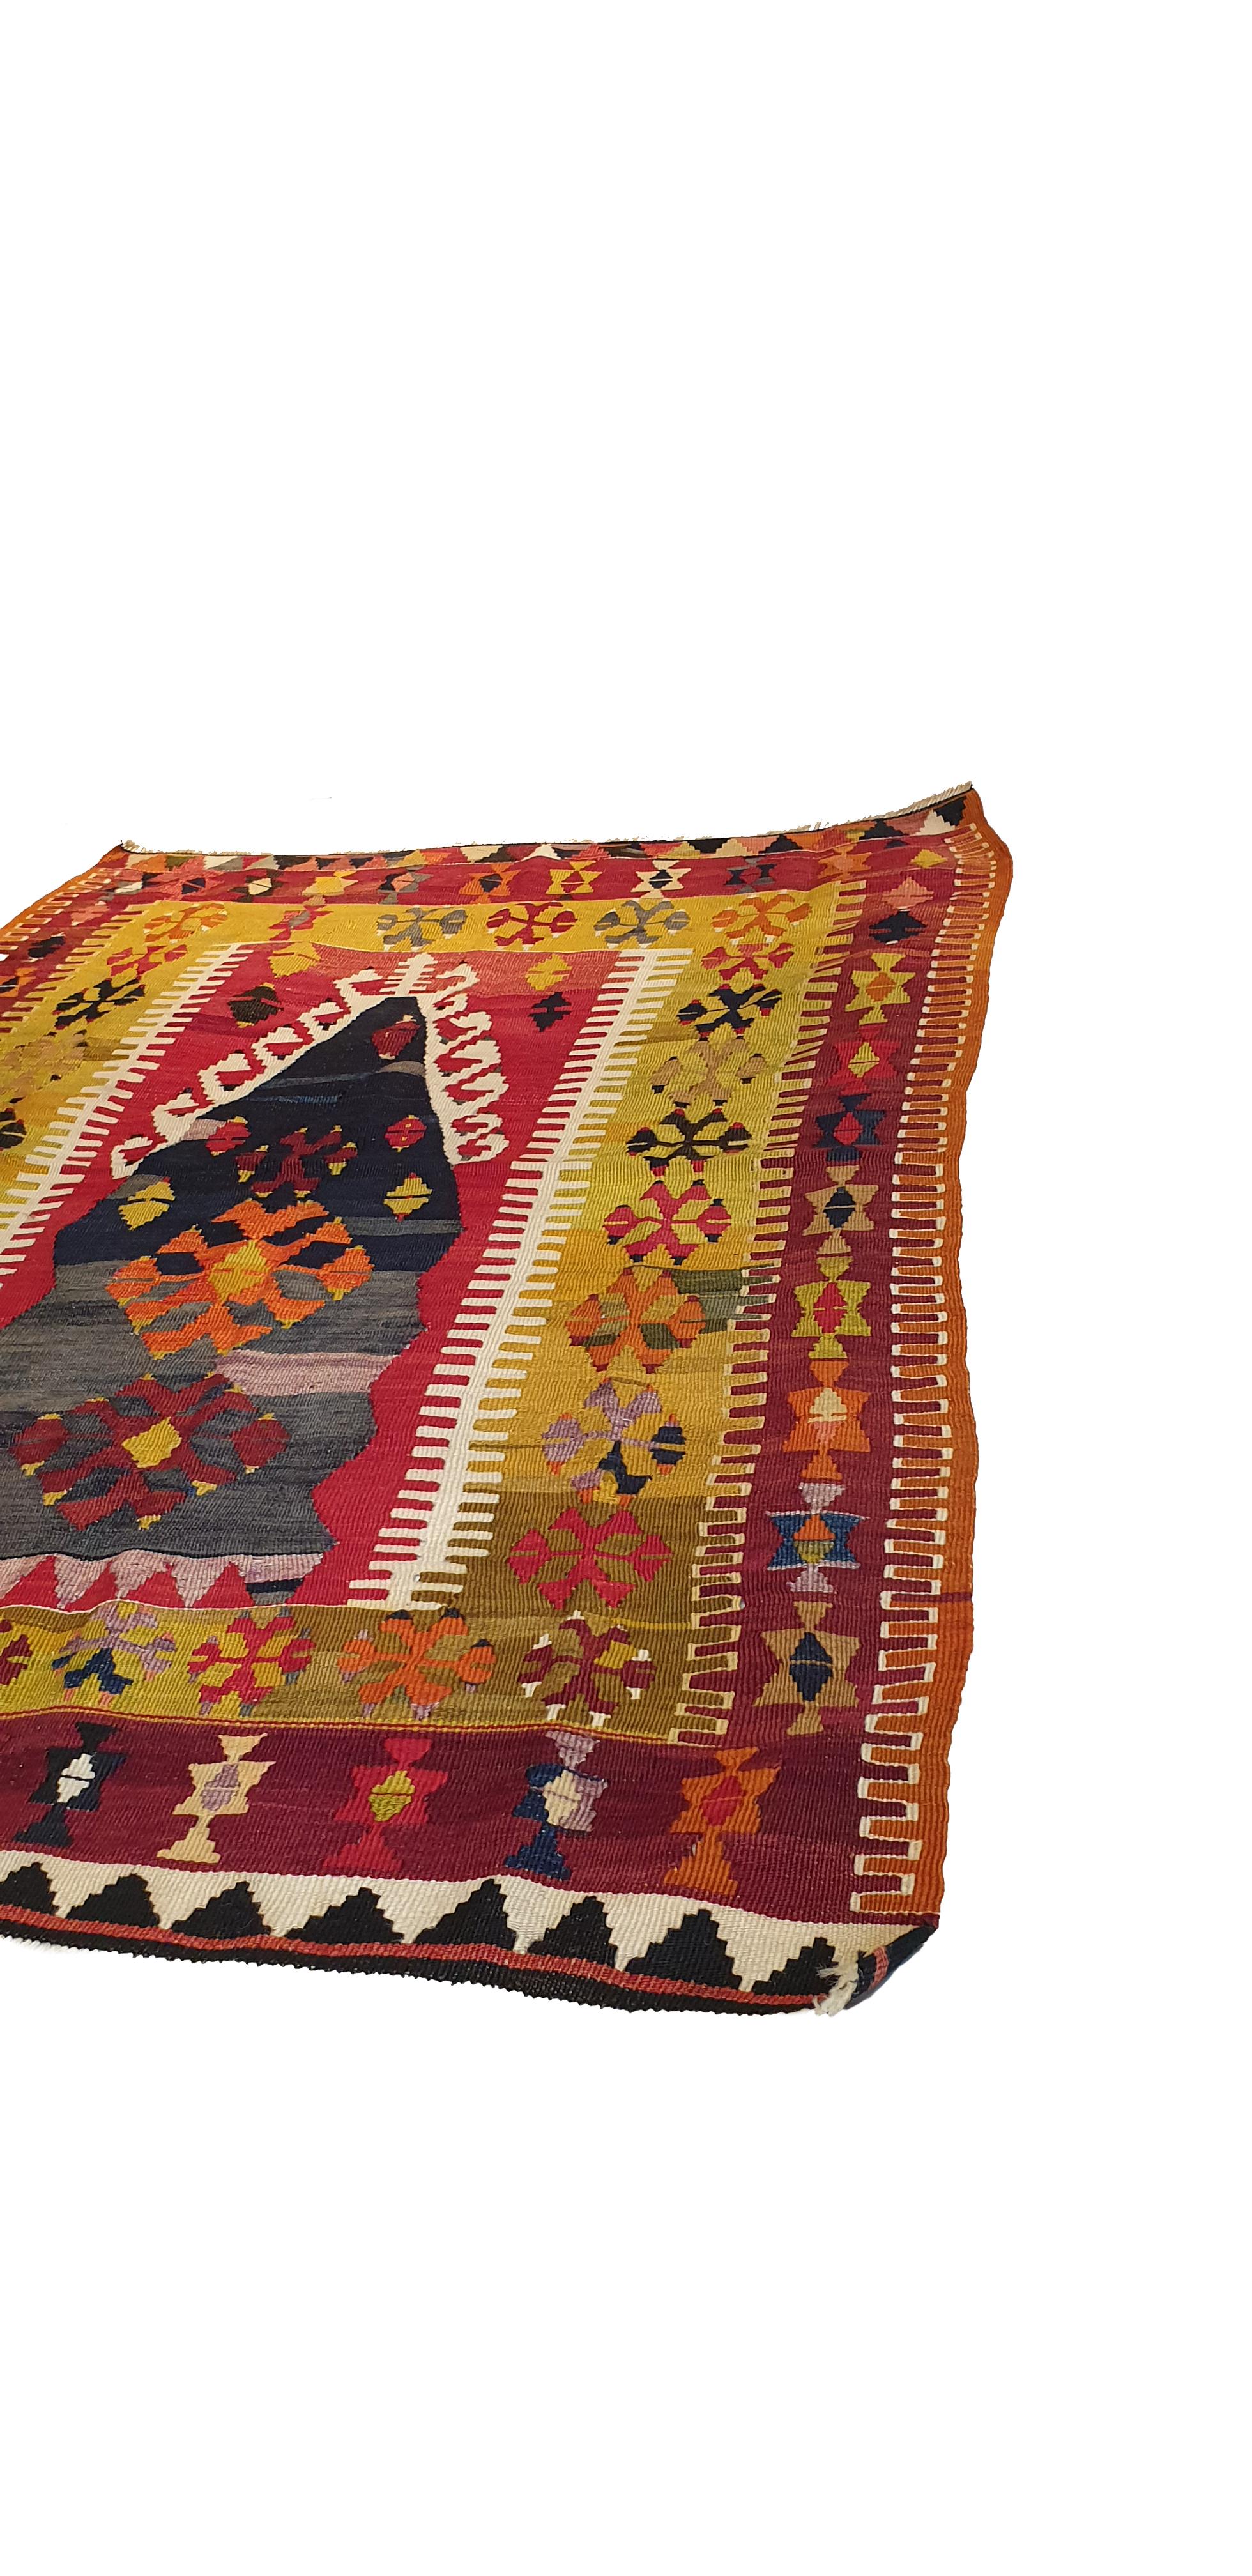 Kilim in Turkey, representing tribal style geometric shapes.
High quality, beautiful graphics and remarkable finesse.

Perfect state of preservation.

Measures: 62.99 in. x 39.37 in.


Hand-woven carpet in Turkey, depicting geometric shapes of